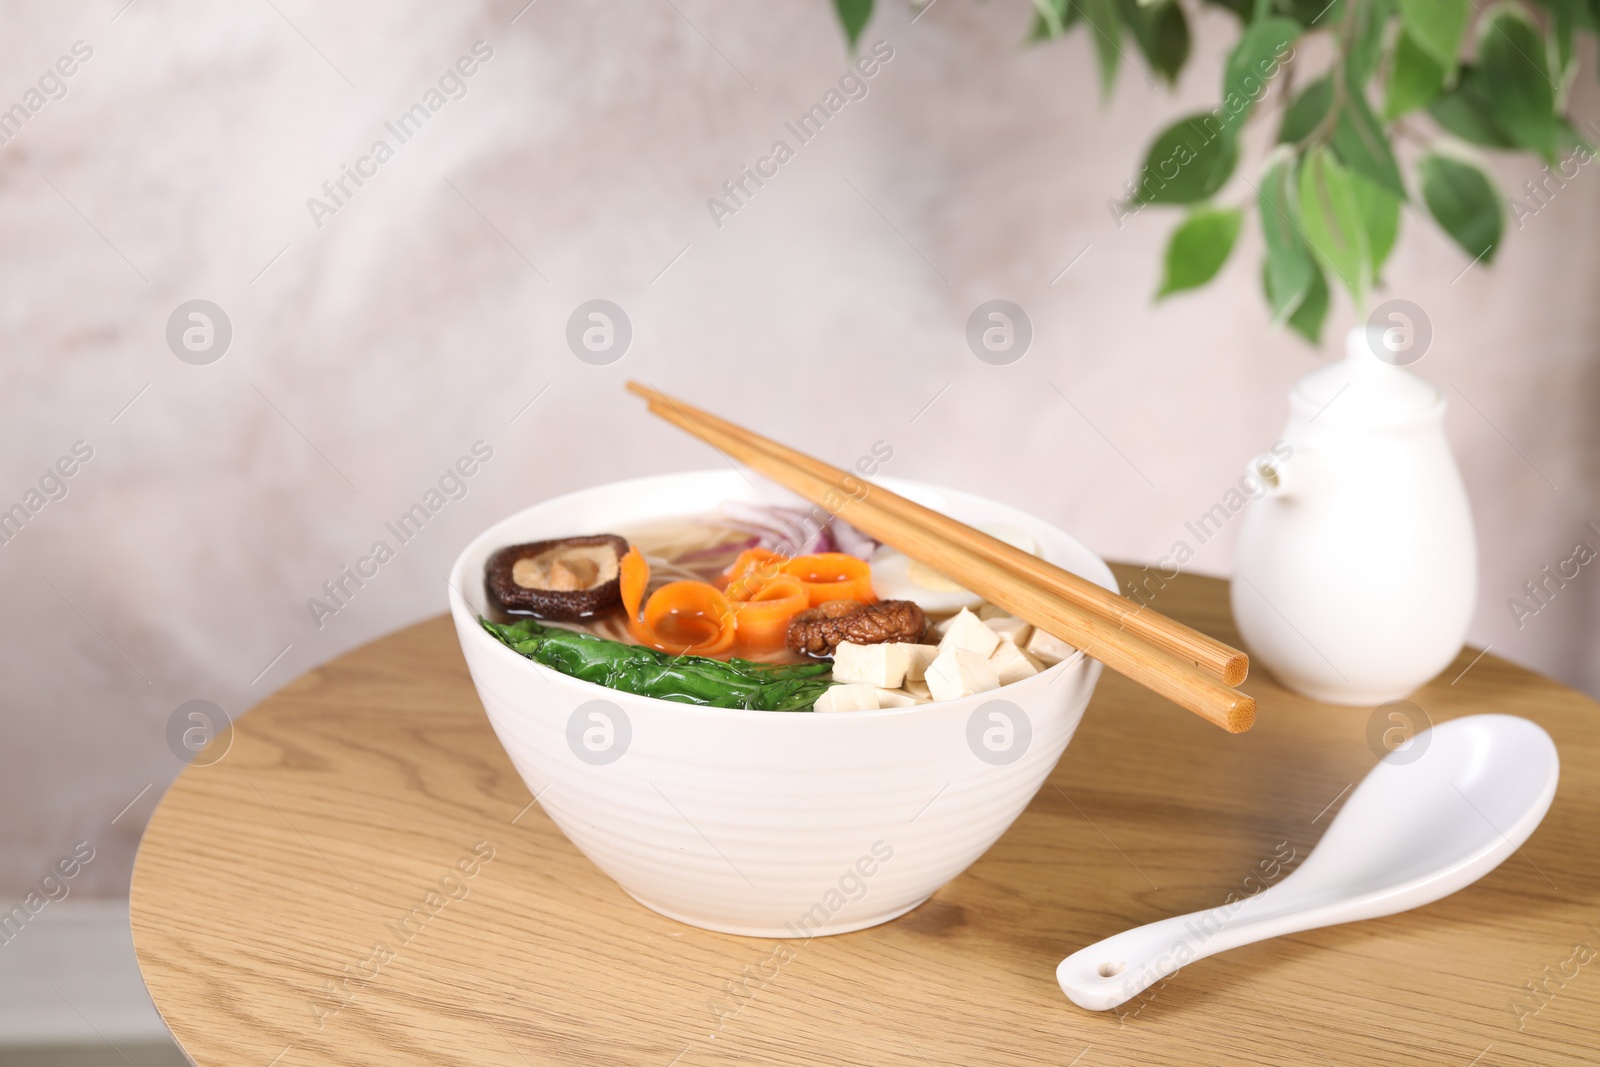 Photo of Delicious vegetarian ramen served on wooden table. Noodle soup